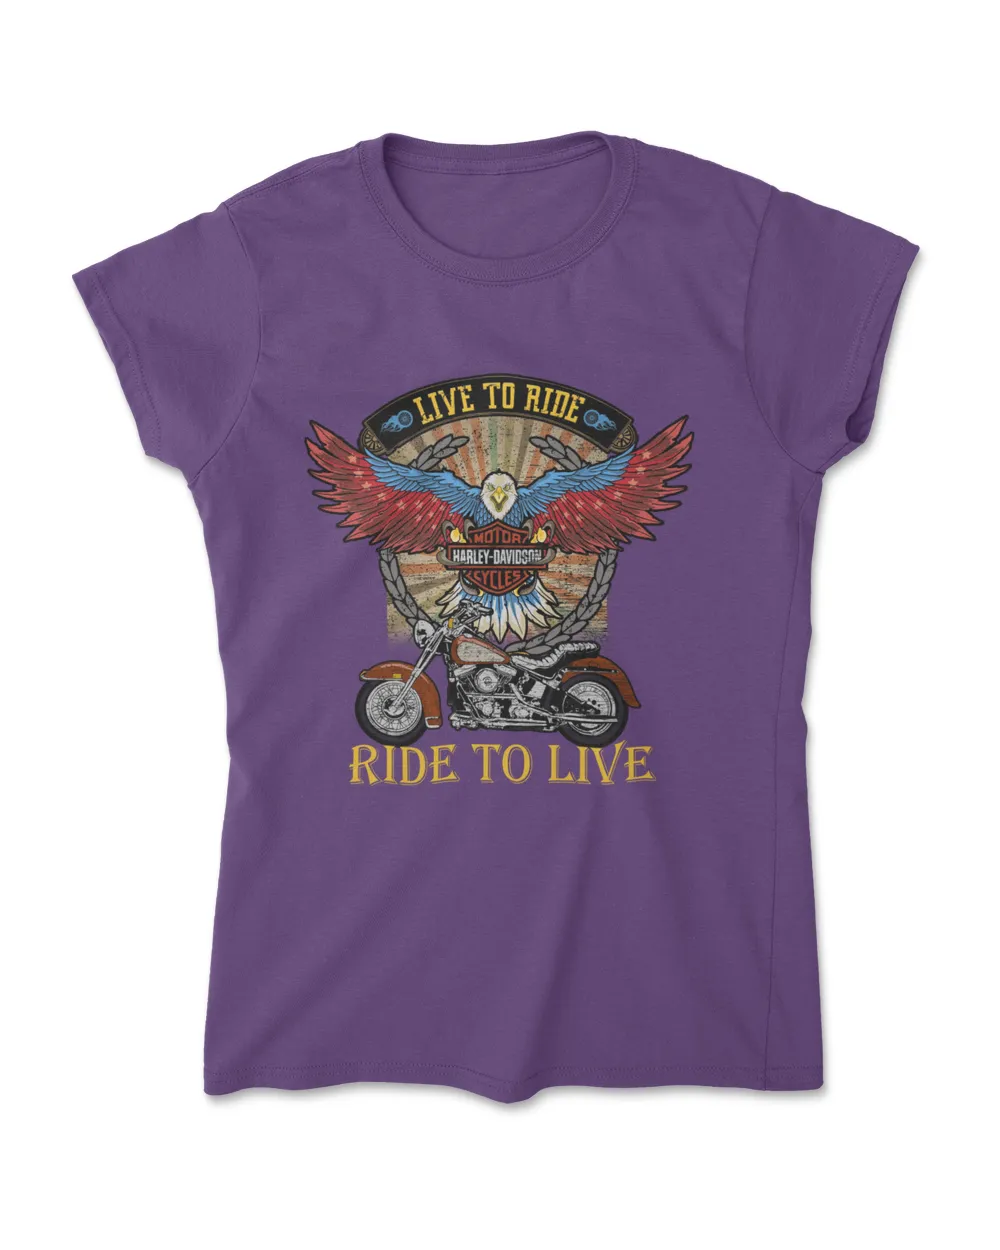 Live To Ride Ride To Live Harley Eagle Motorcycle Retro Vintage